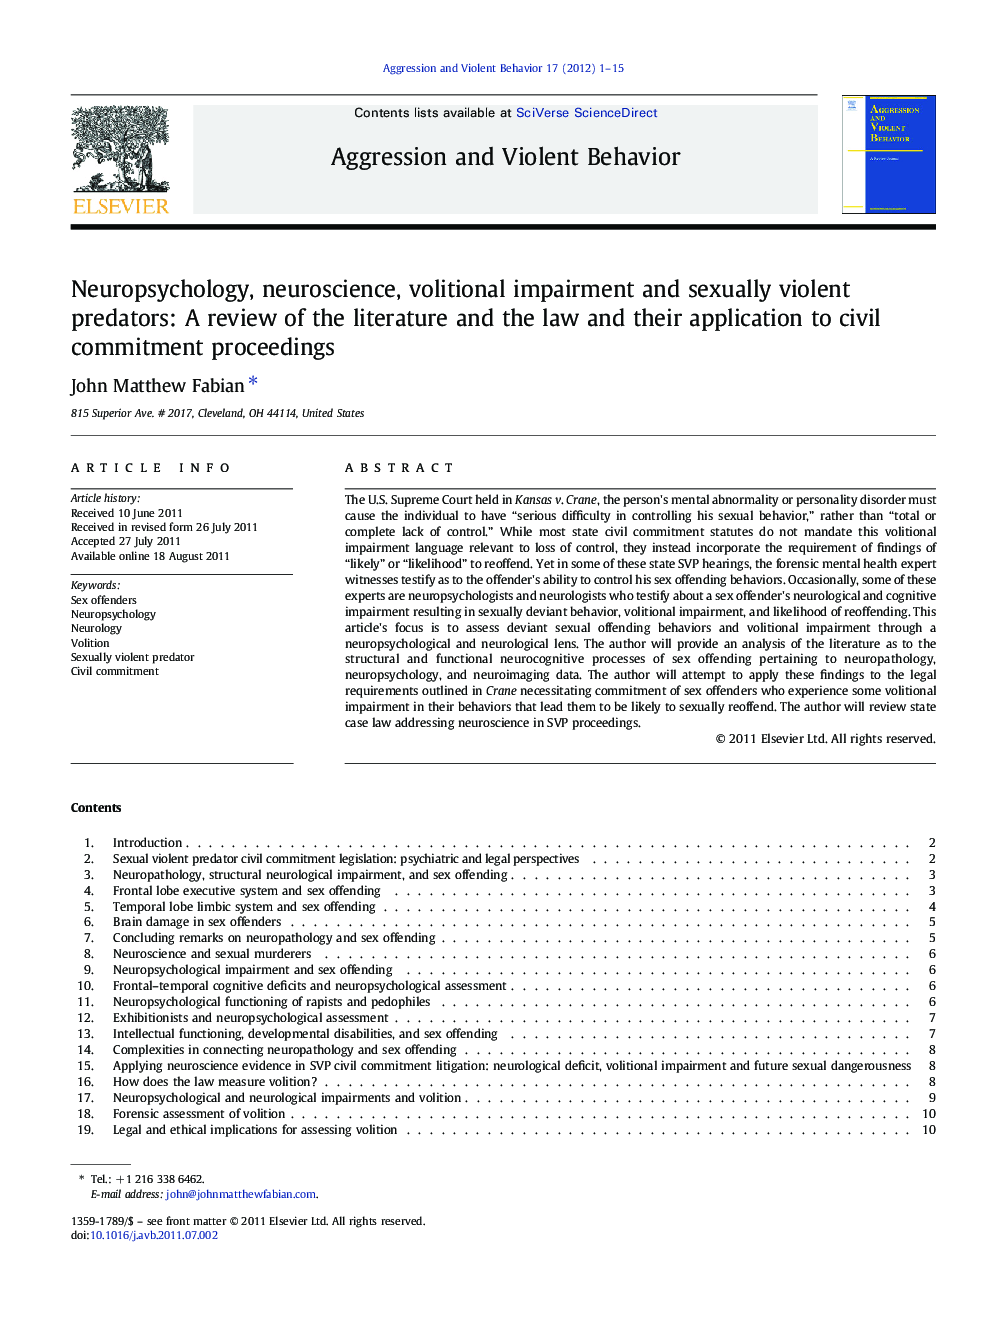 Neuropsychology, neuroscience, volitional impairment and sexually violent predators: A review of the literature and the law and their application to civil commitment proceedings